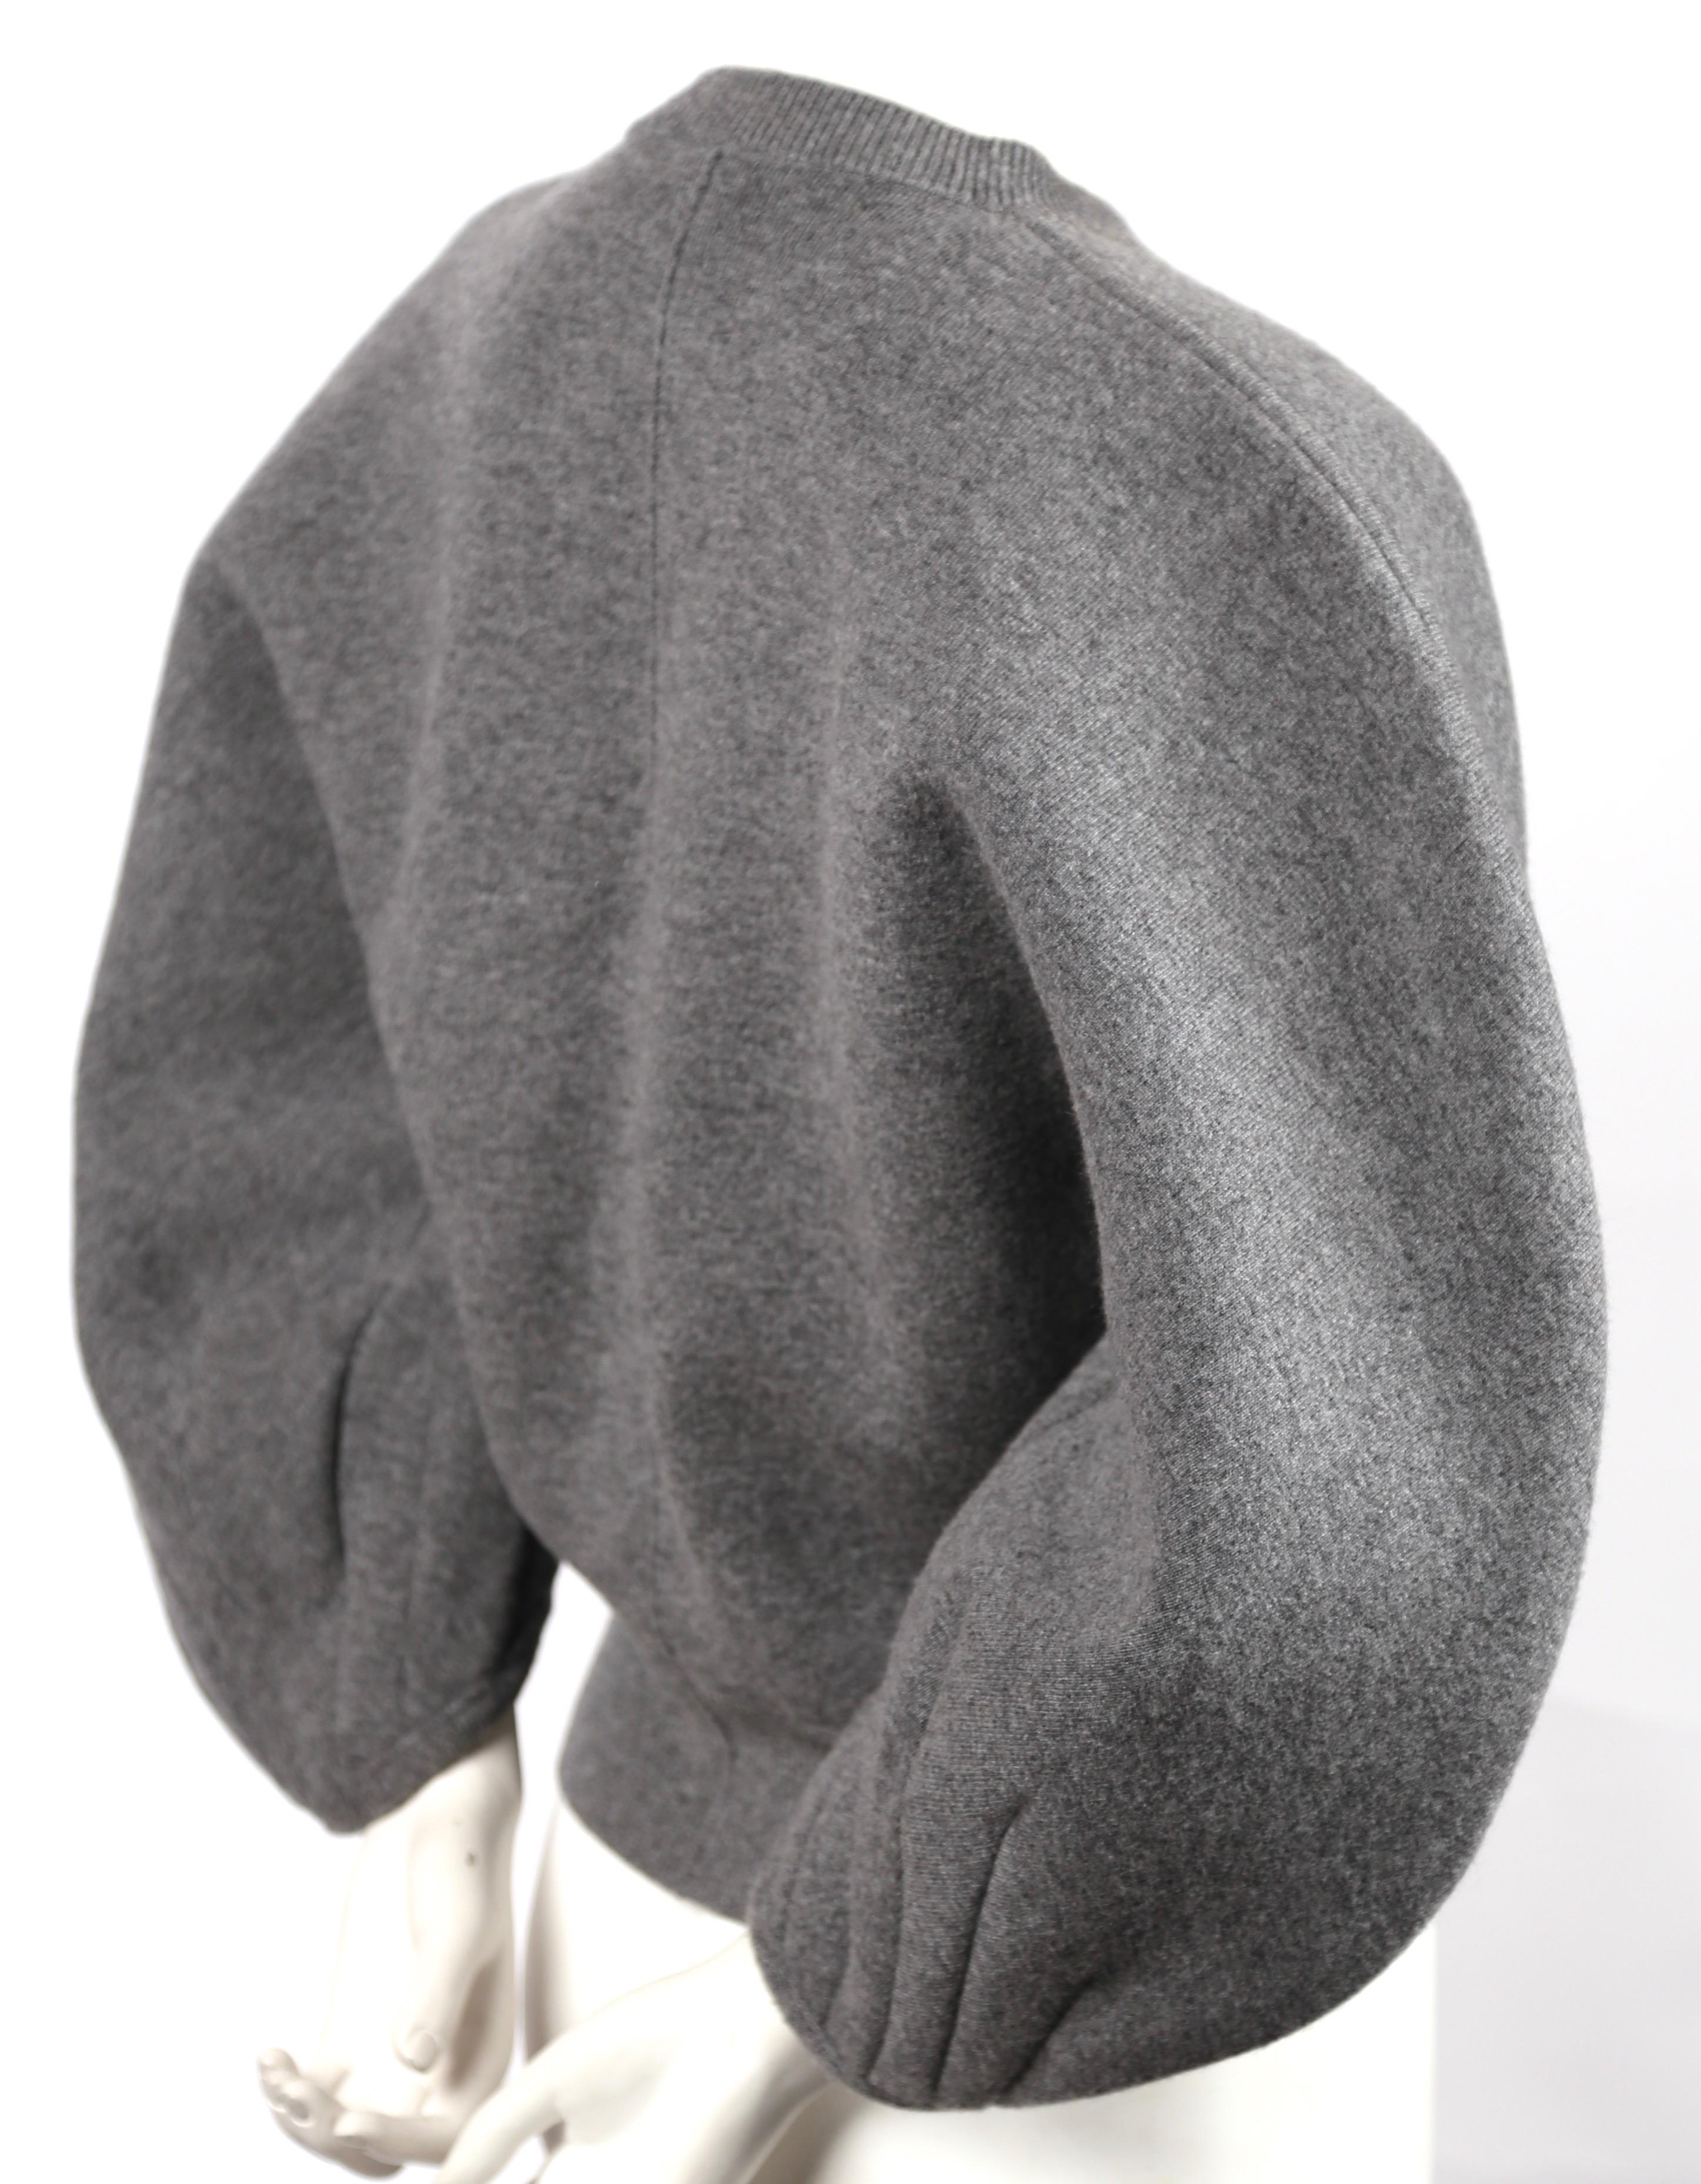 CELINE by PHOEBE PHILO charcoal grey sweater with rounded sleeves at ...